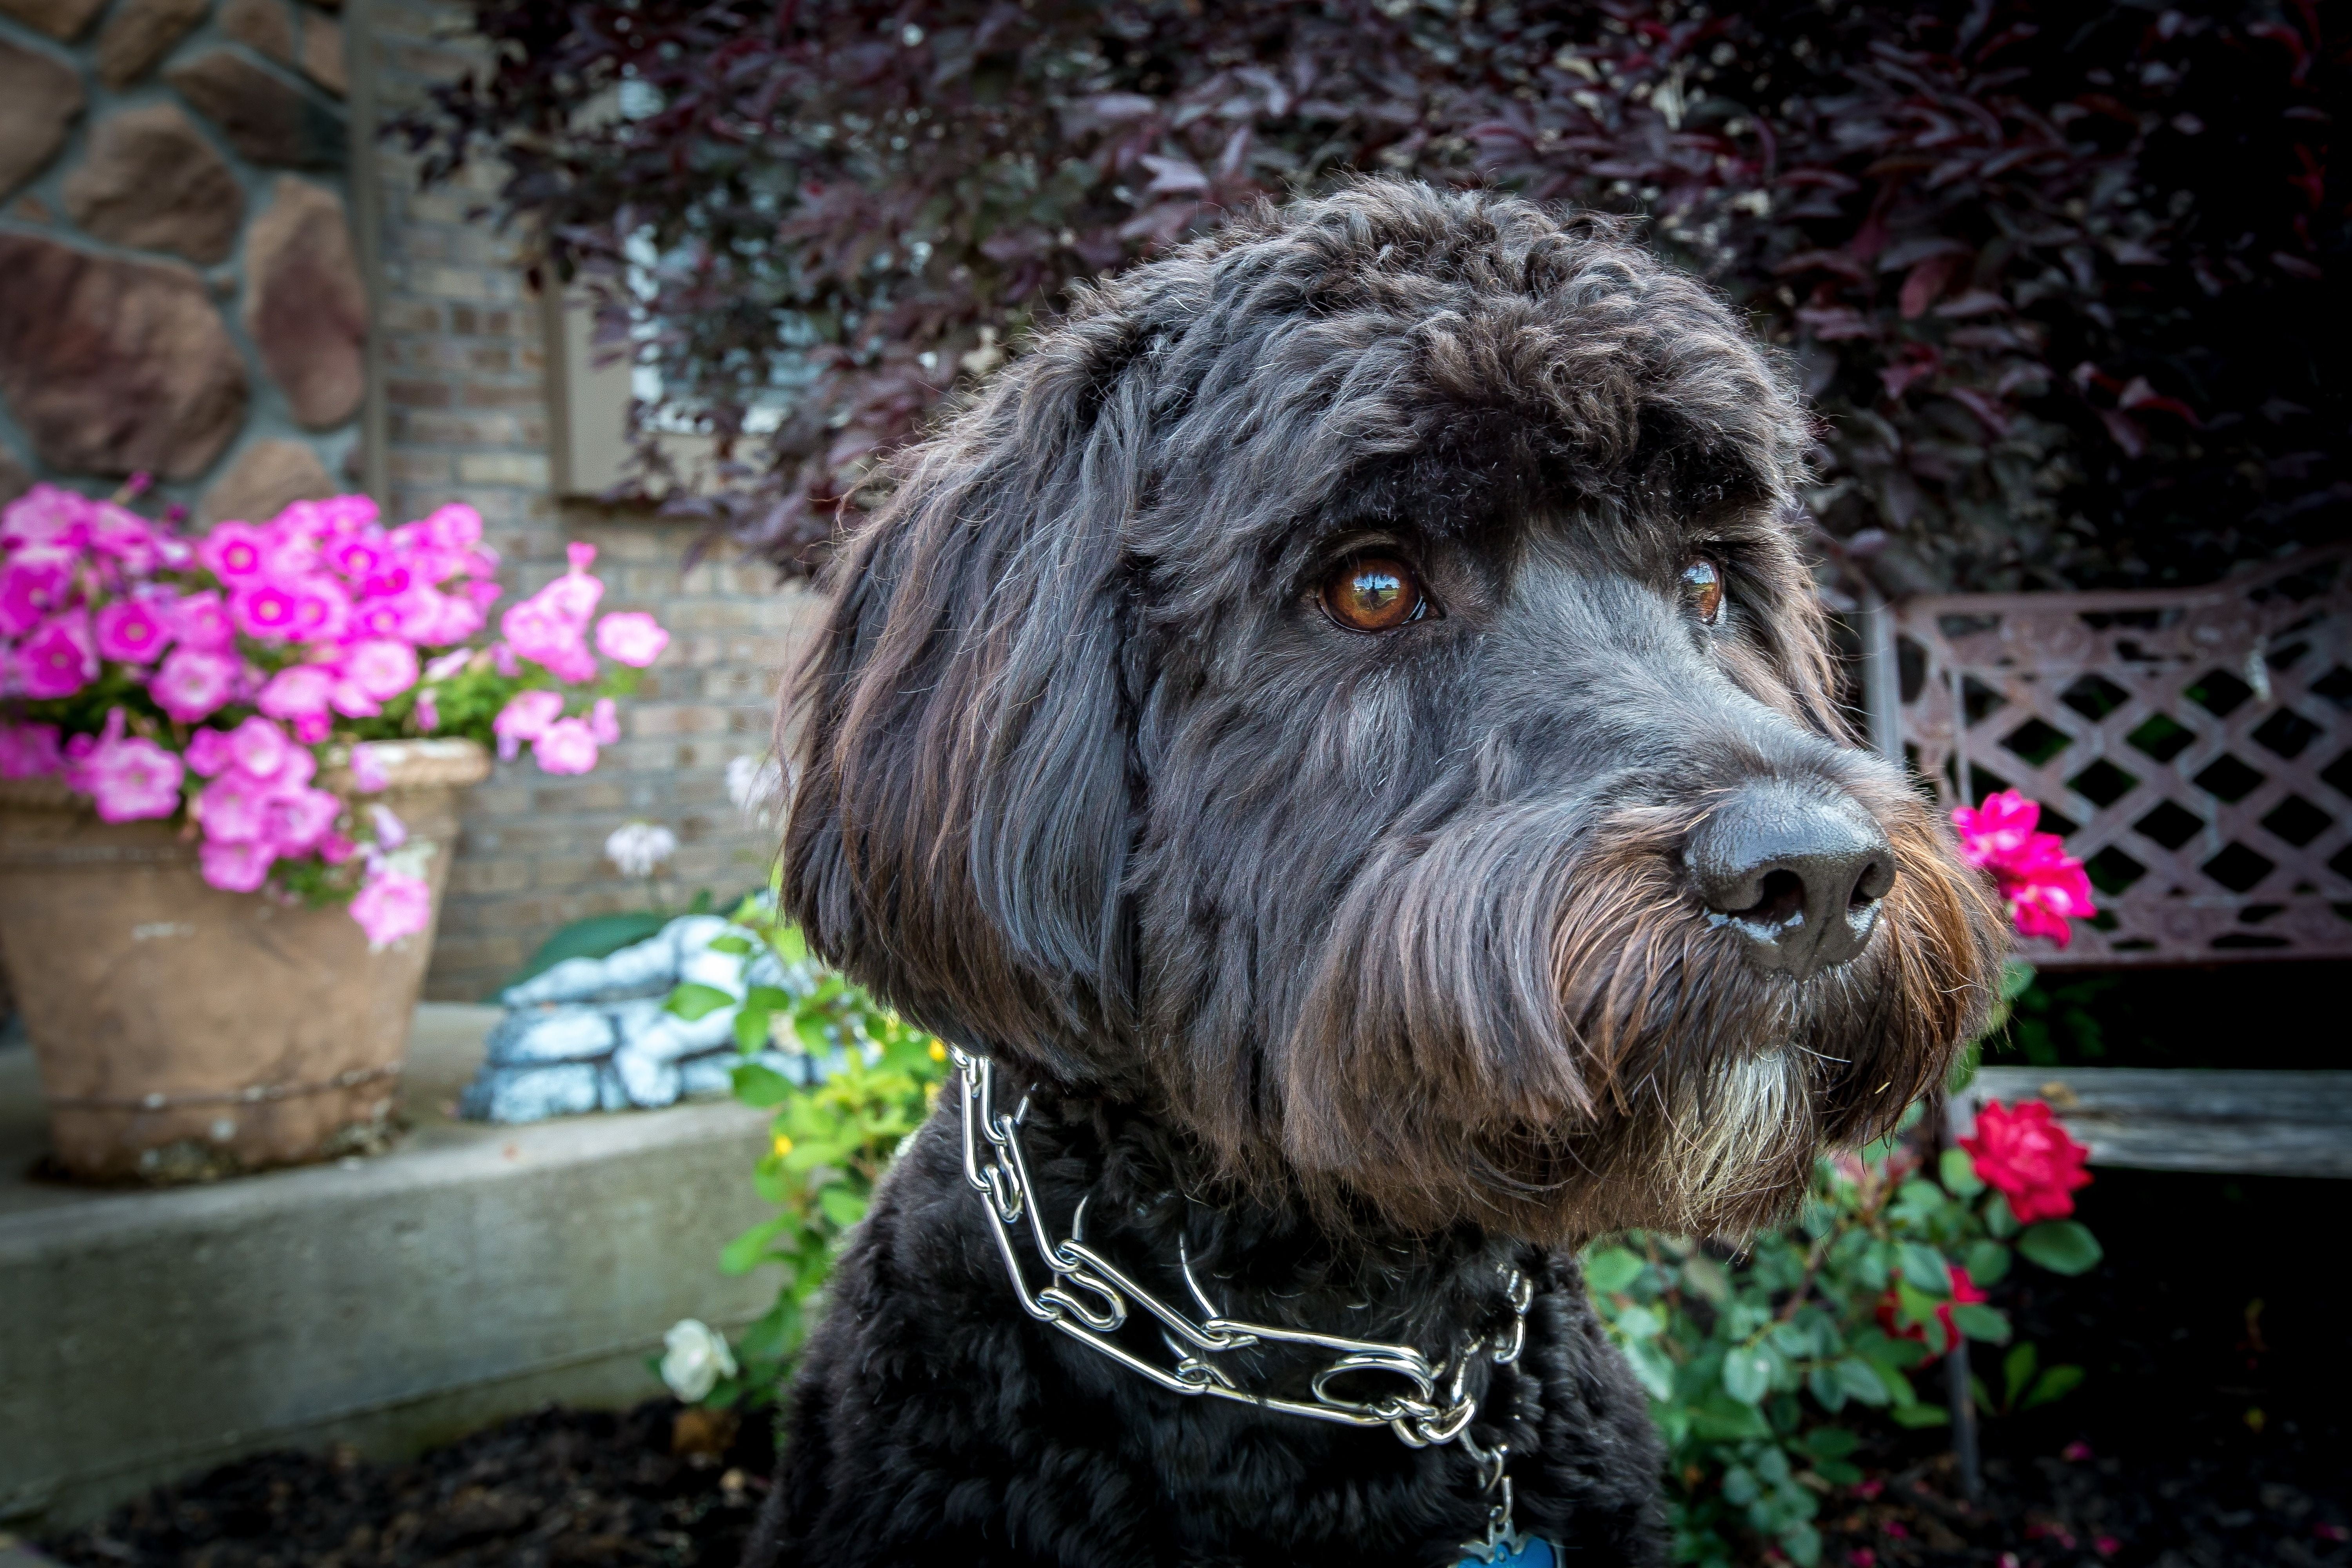 close-up photo of long-coated wirehaired brown and gray dog during daytime